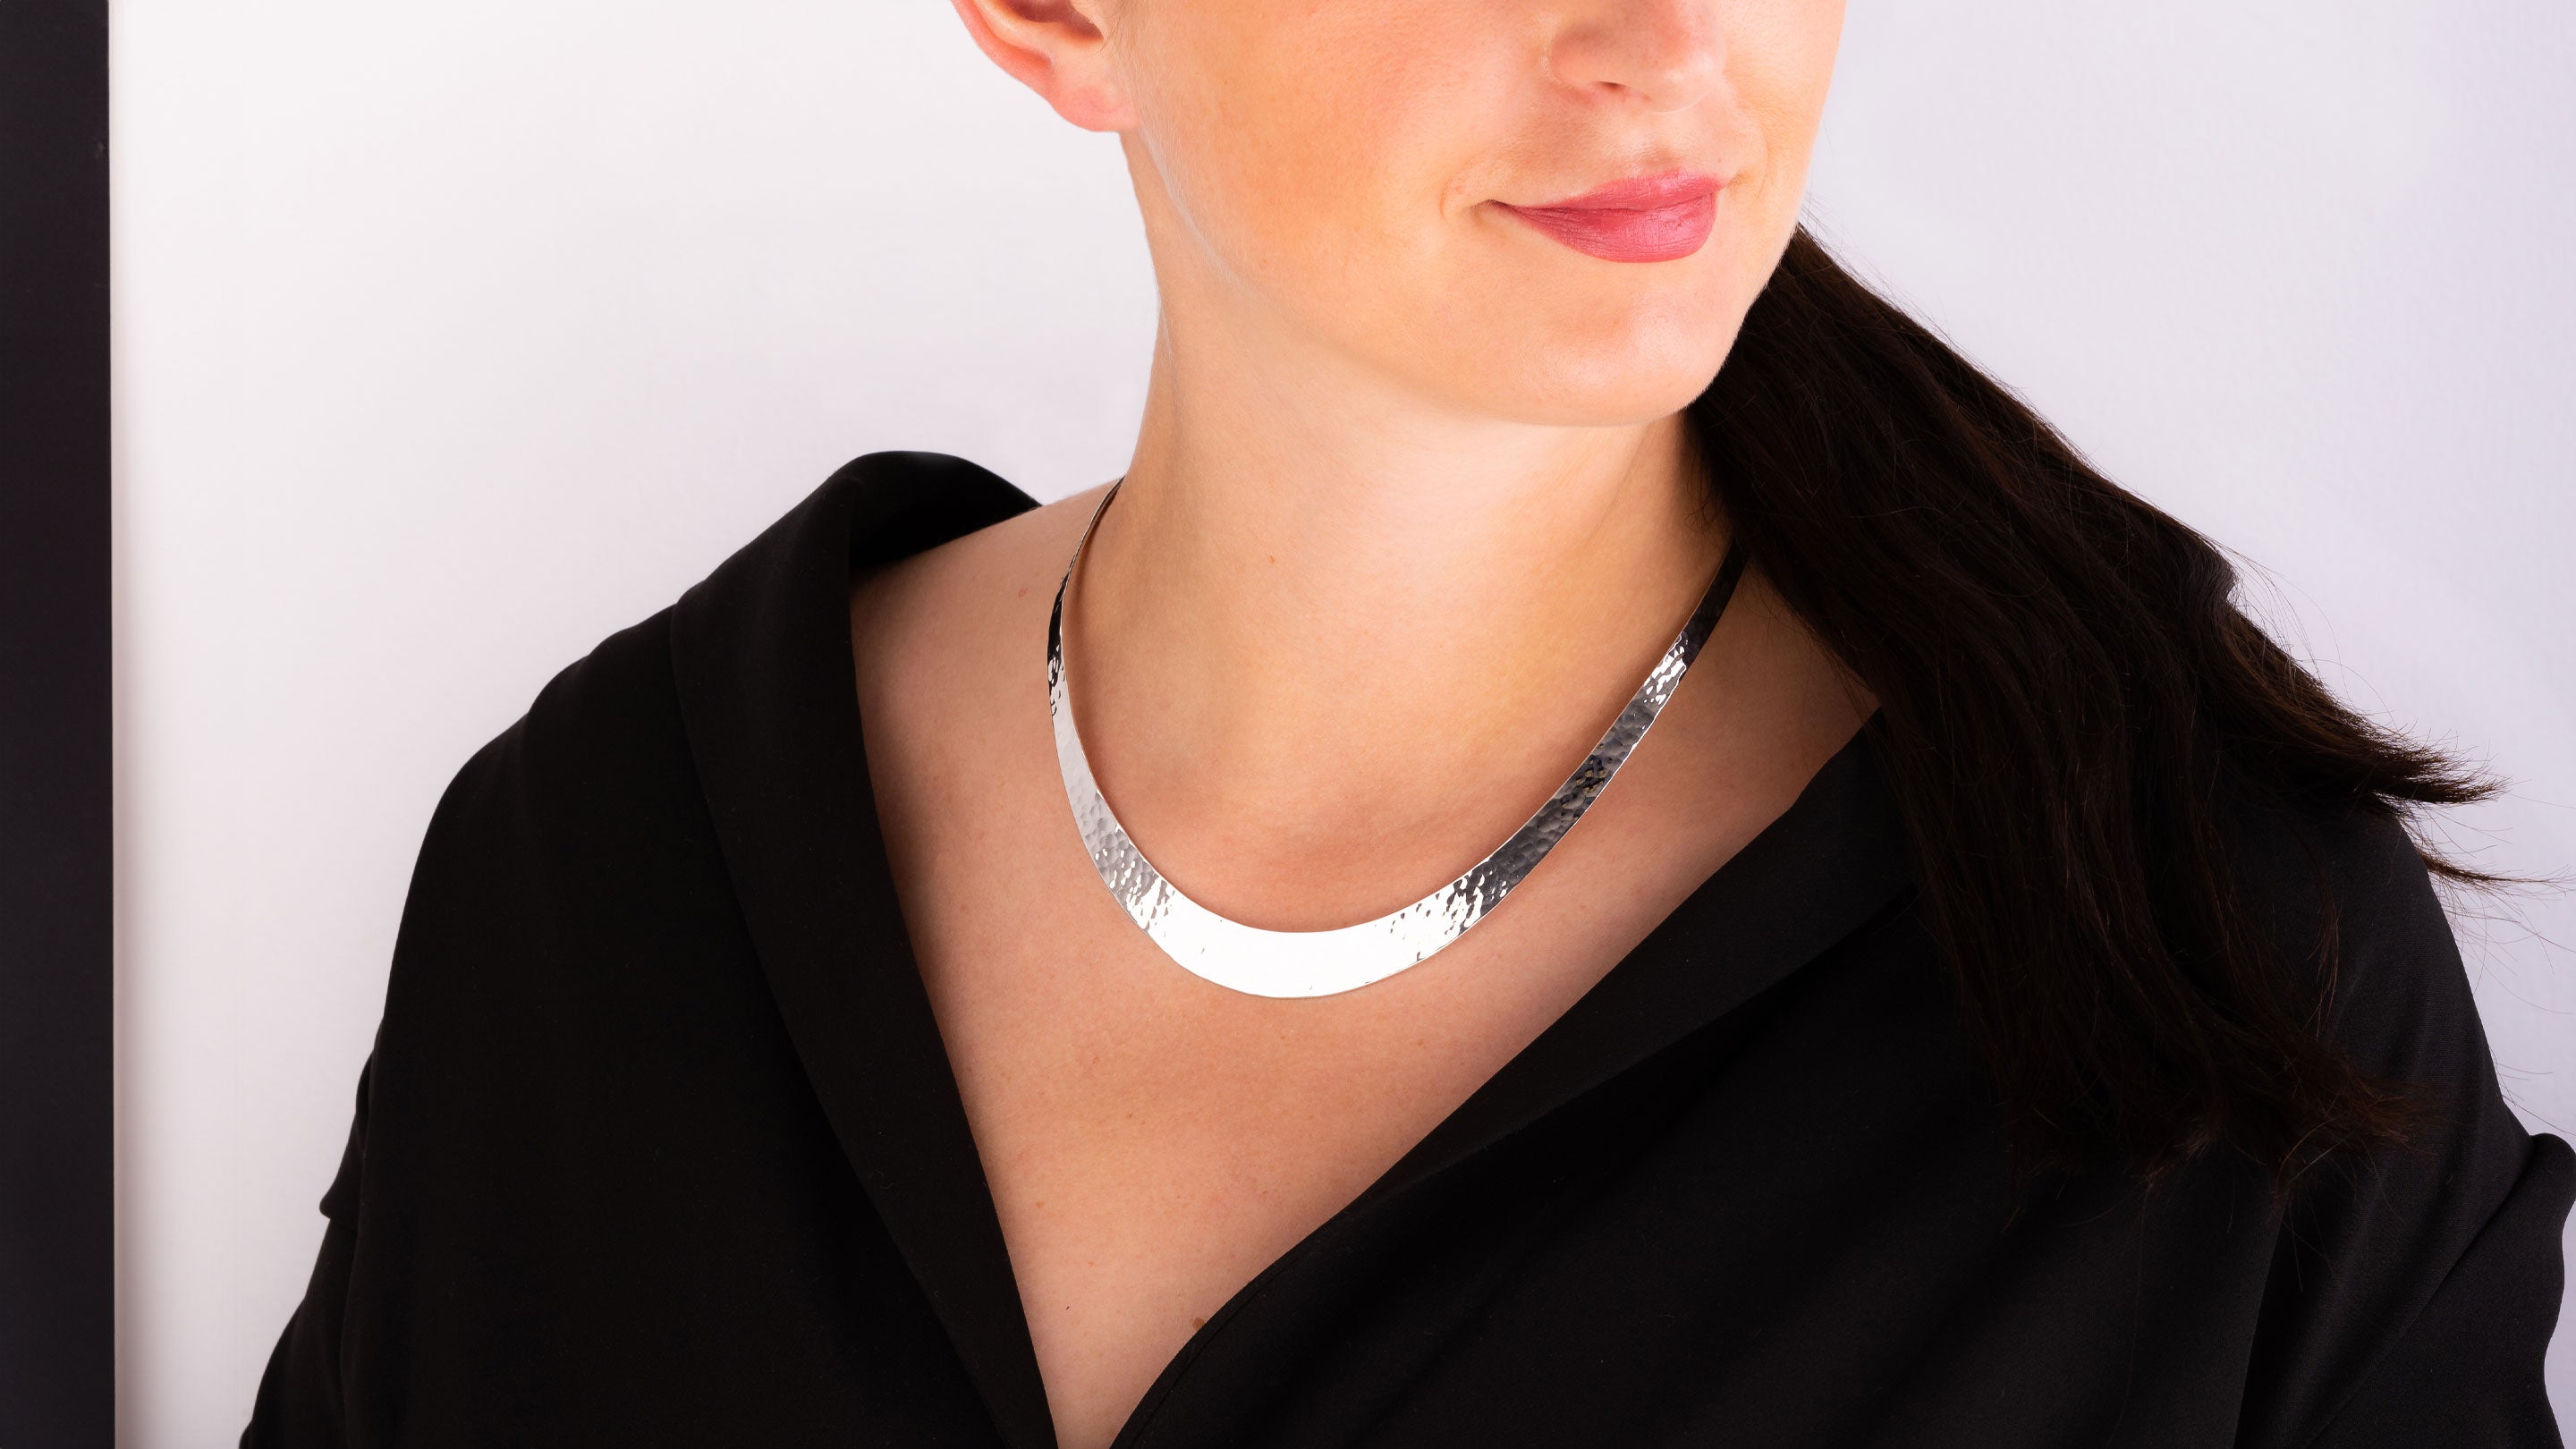 Plain Sterling Silver Necklace Chain By Black Pearl | notonthehighstreet.com